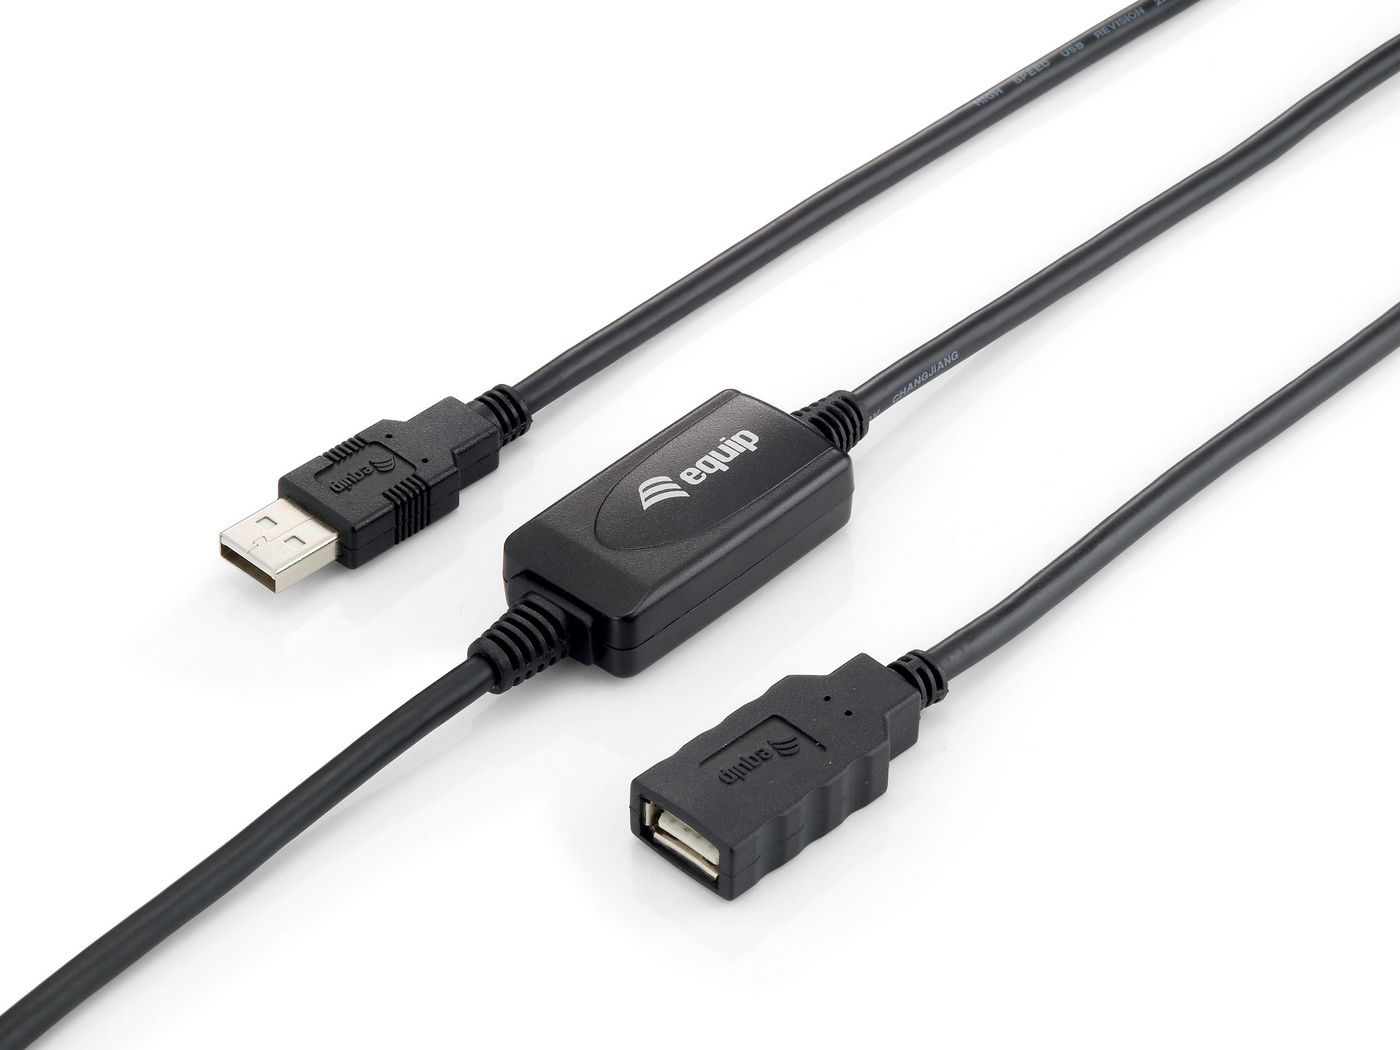 Equip 133310 USB 2.0 ACTIVE EXTENSION CABLE 